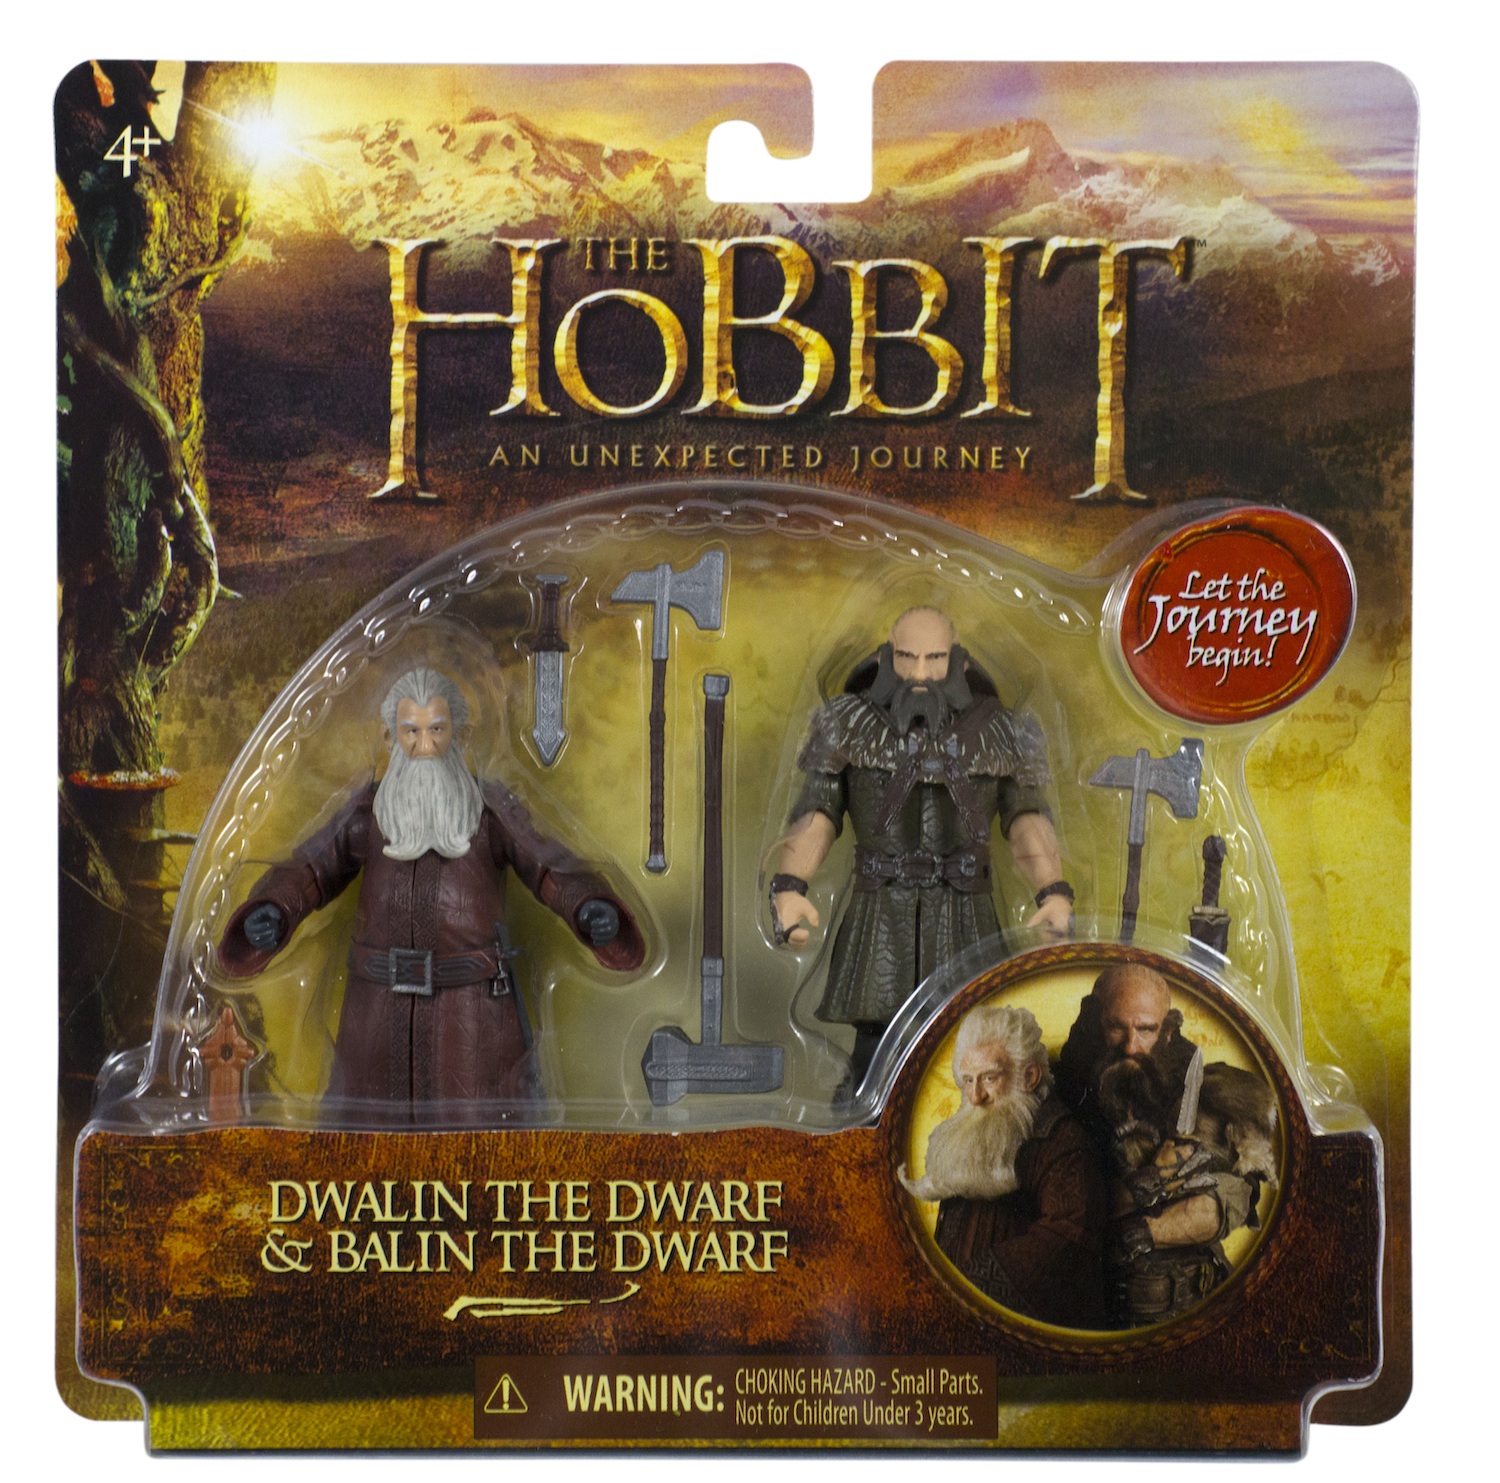 The Hobbit An Unexpected Journey Hero Pack Five 3.75 inch Action Figure Box Set 